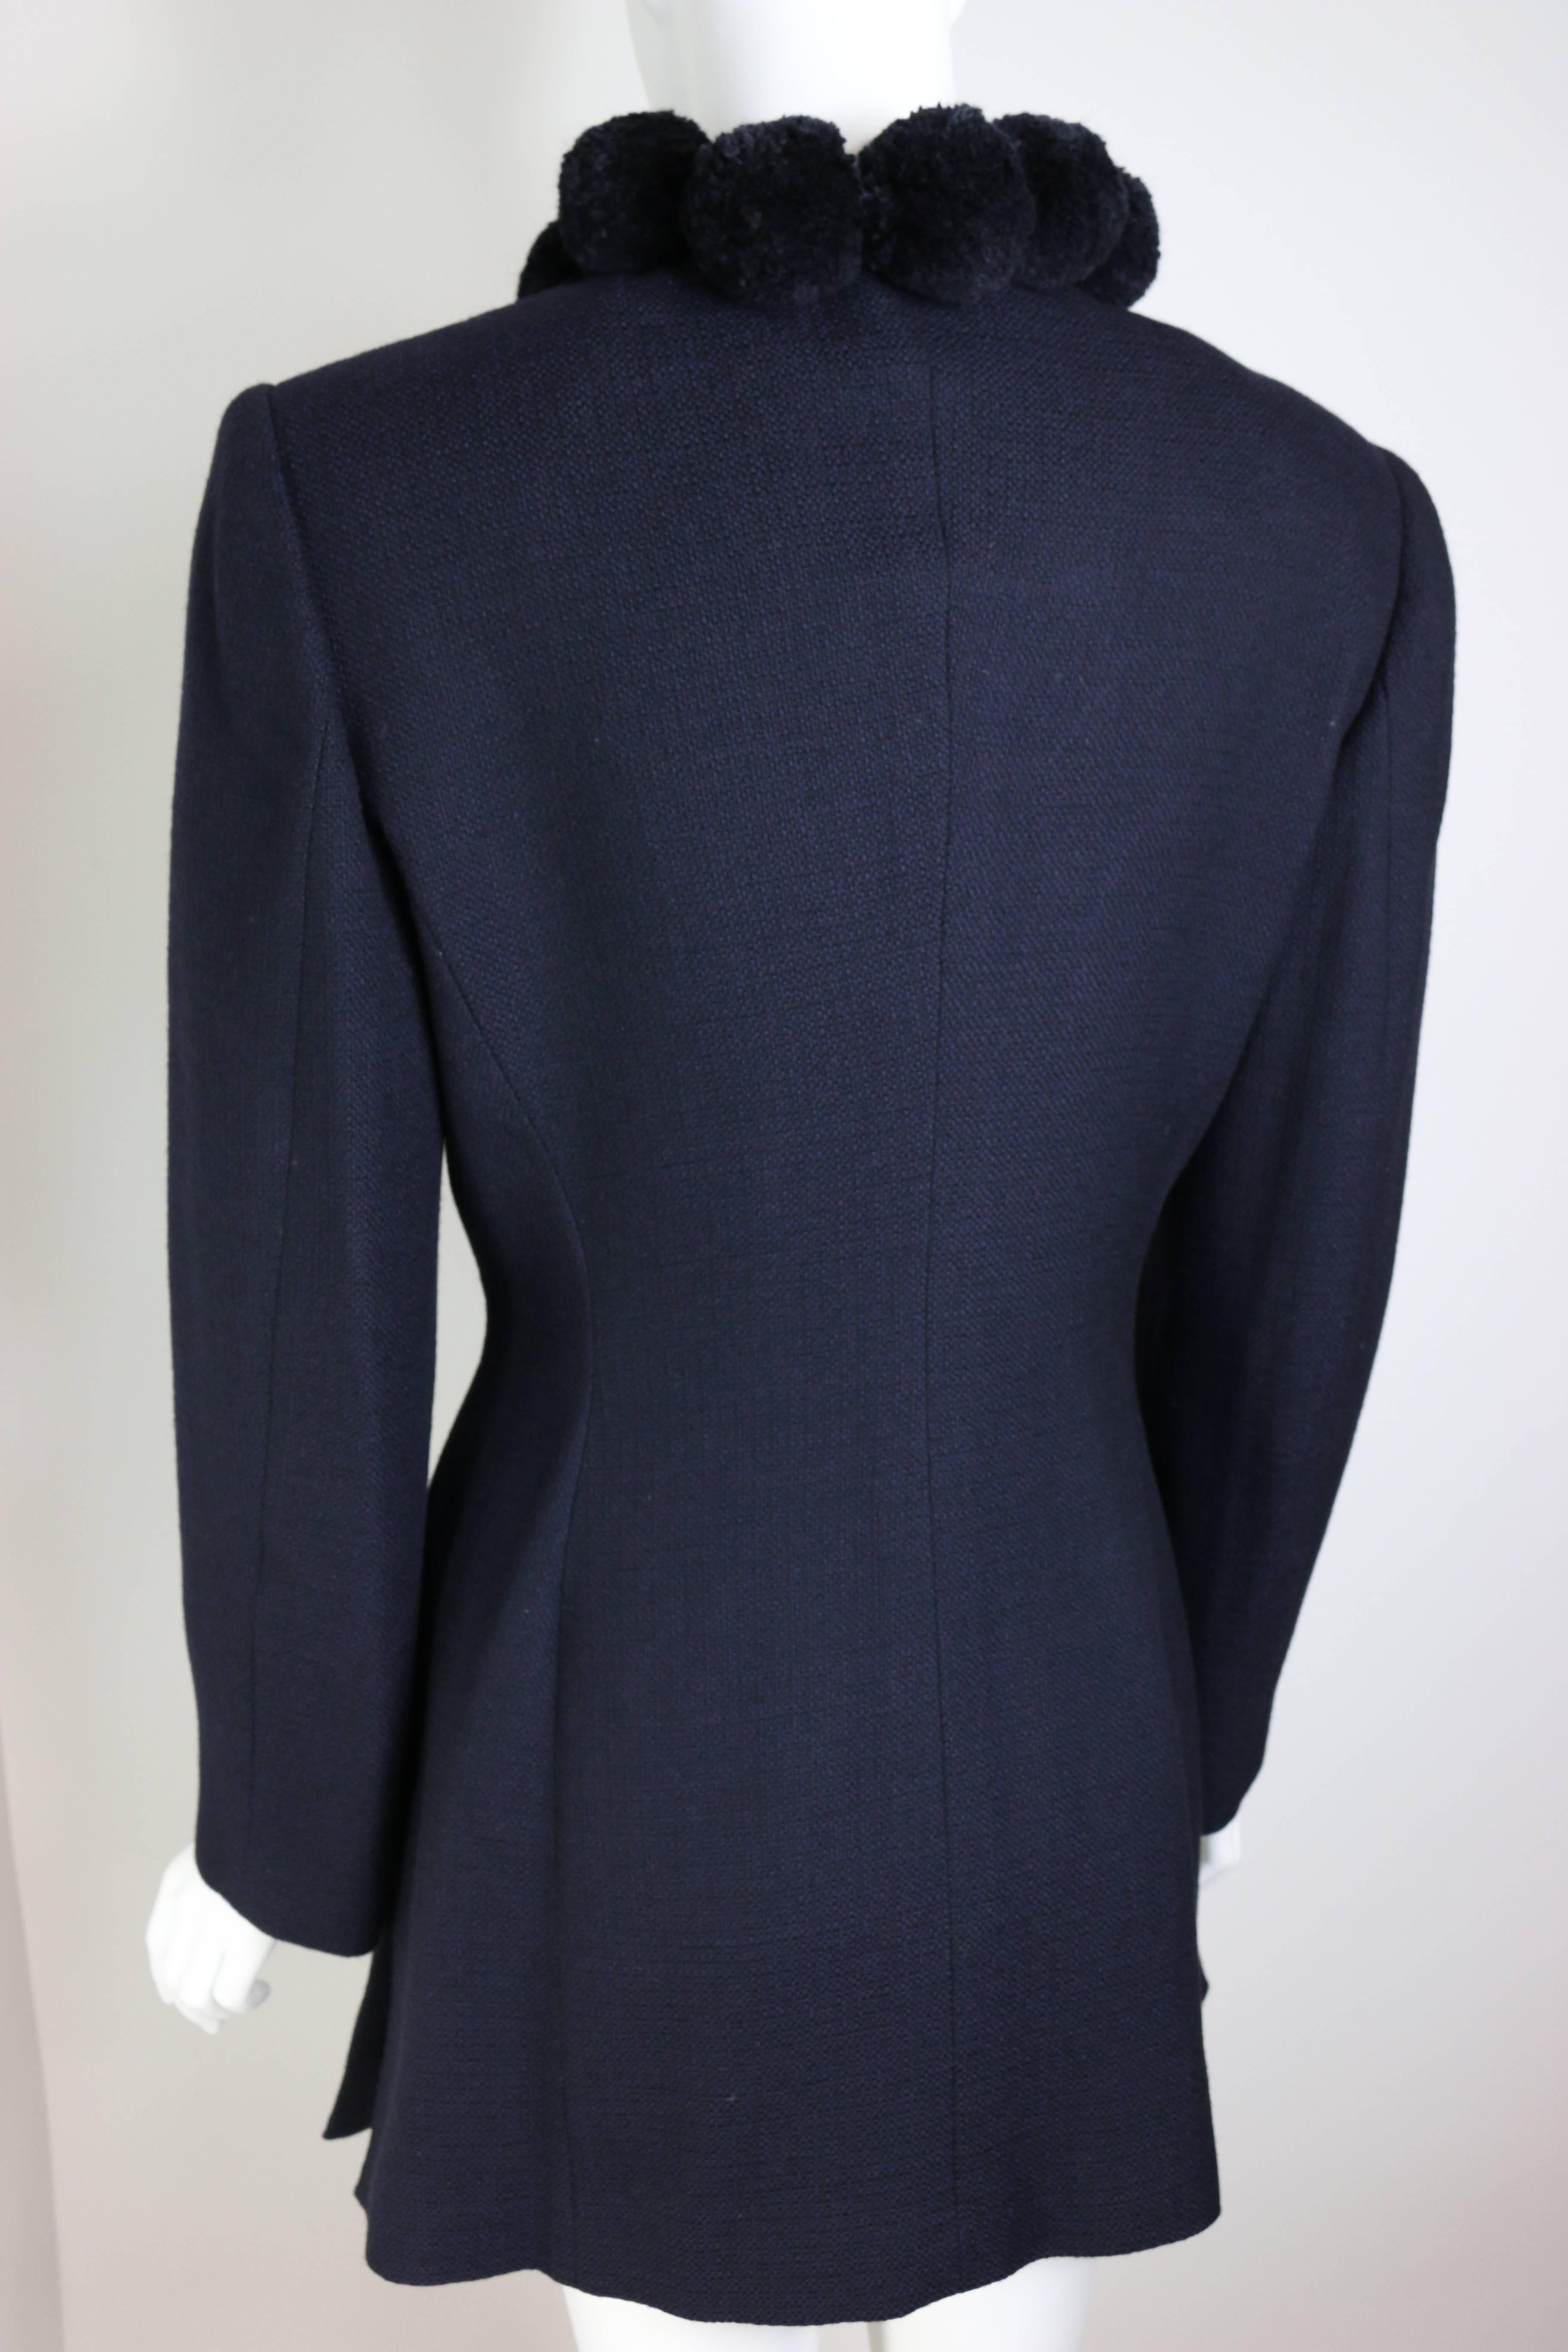 90s Alberta Ferretti Navy Pom Bouclé Jacket In Good Condition For Sale In Sheung Wan, HK